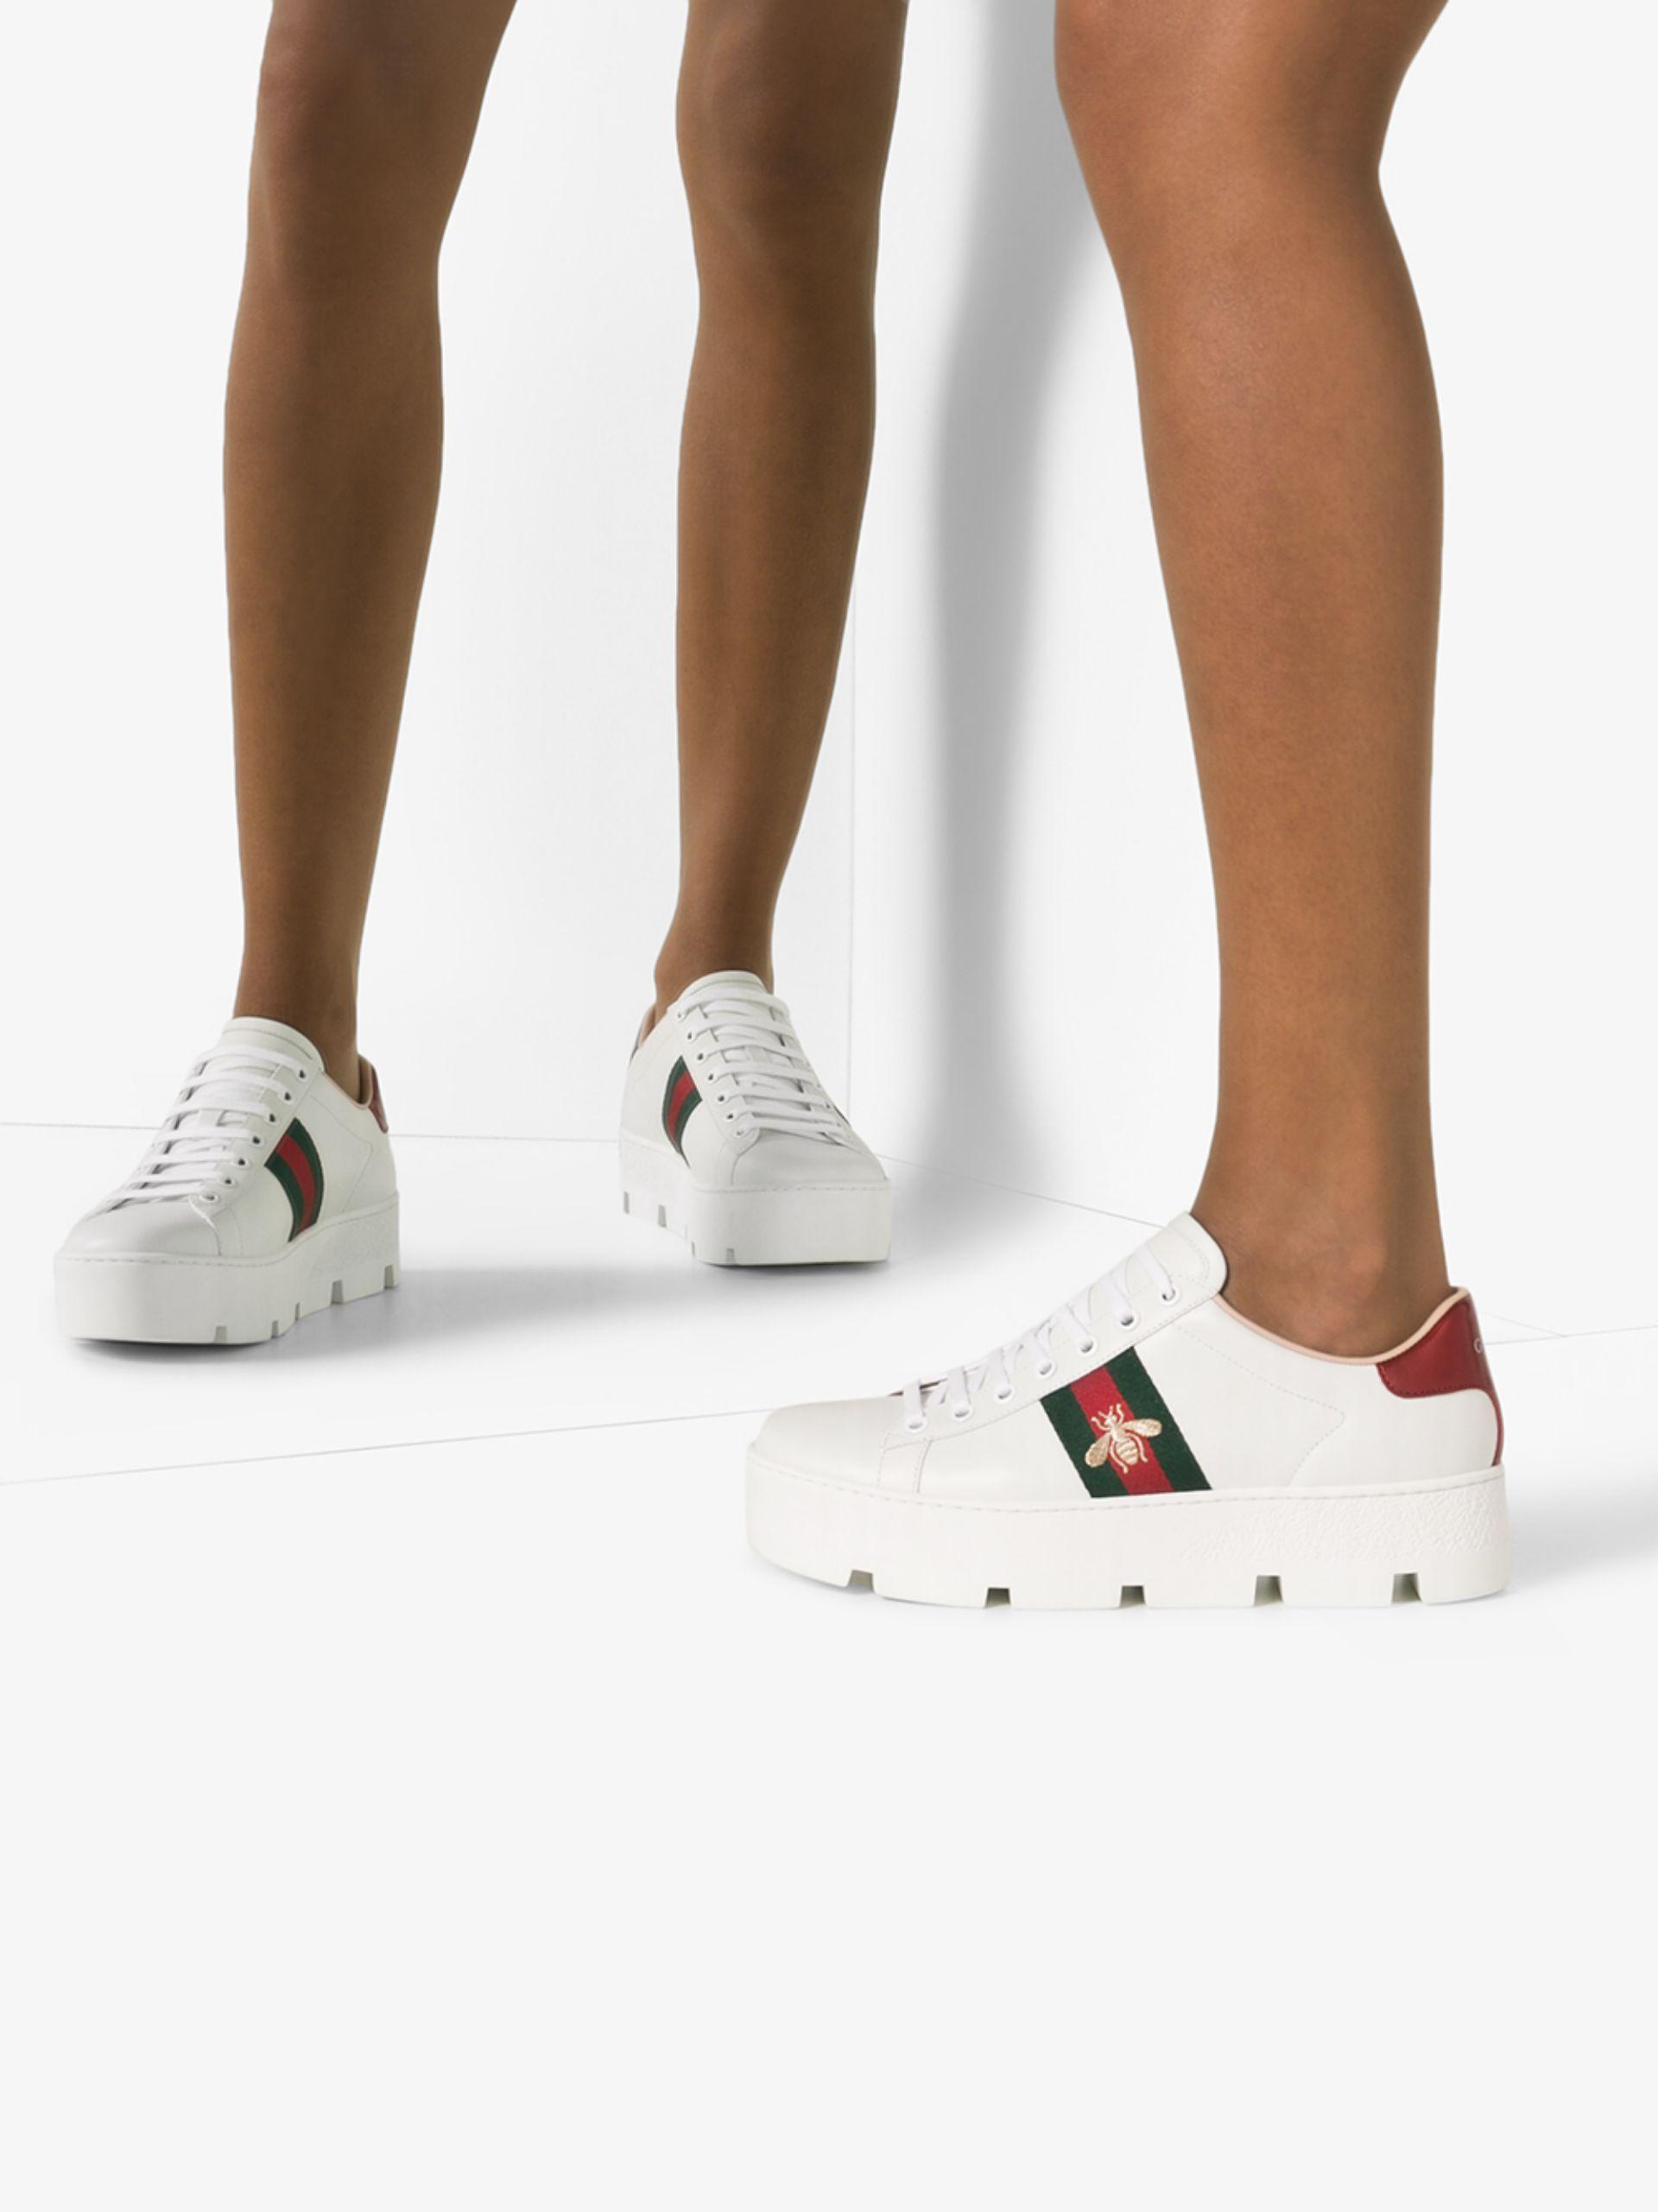 Gucci Ace Embroidered Leather Platform Sneaker in White | Lyst